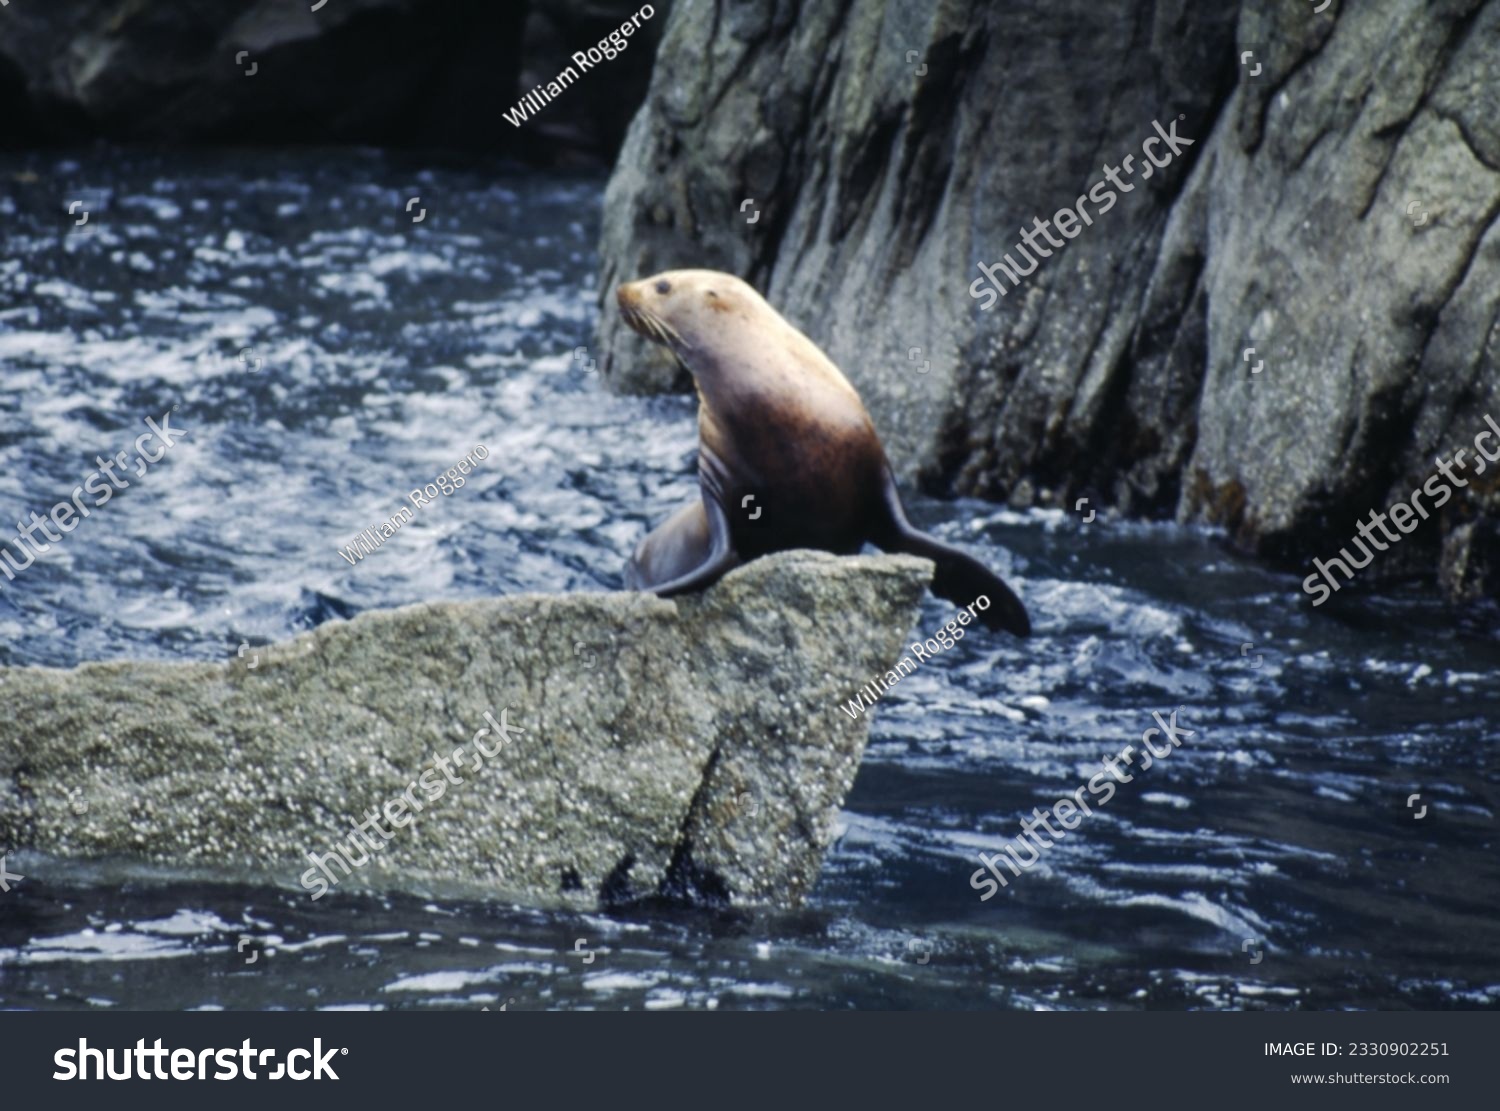 Northern fur seals have a stocky body, small head, very short snout, and extremely dense fur that ends at the wrist lines of their flippers. Their hind flippers can be up to one-fourth body length. #2330902251